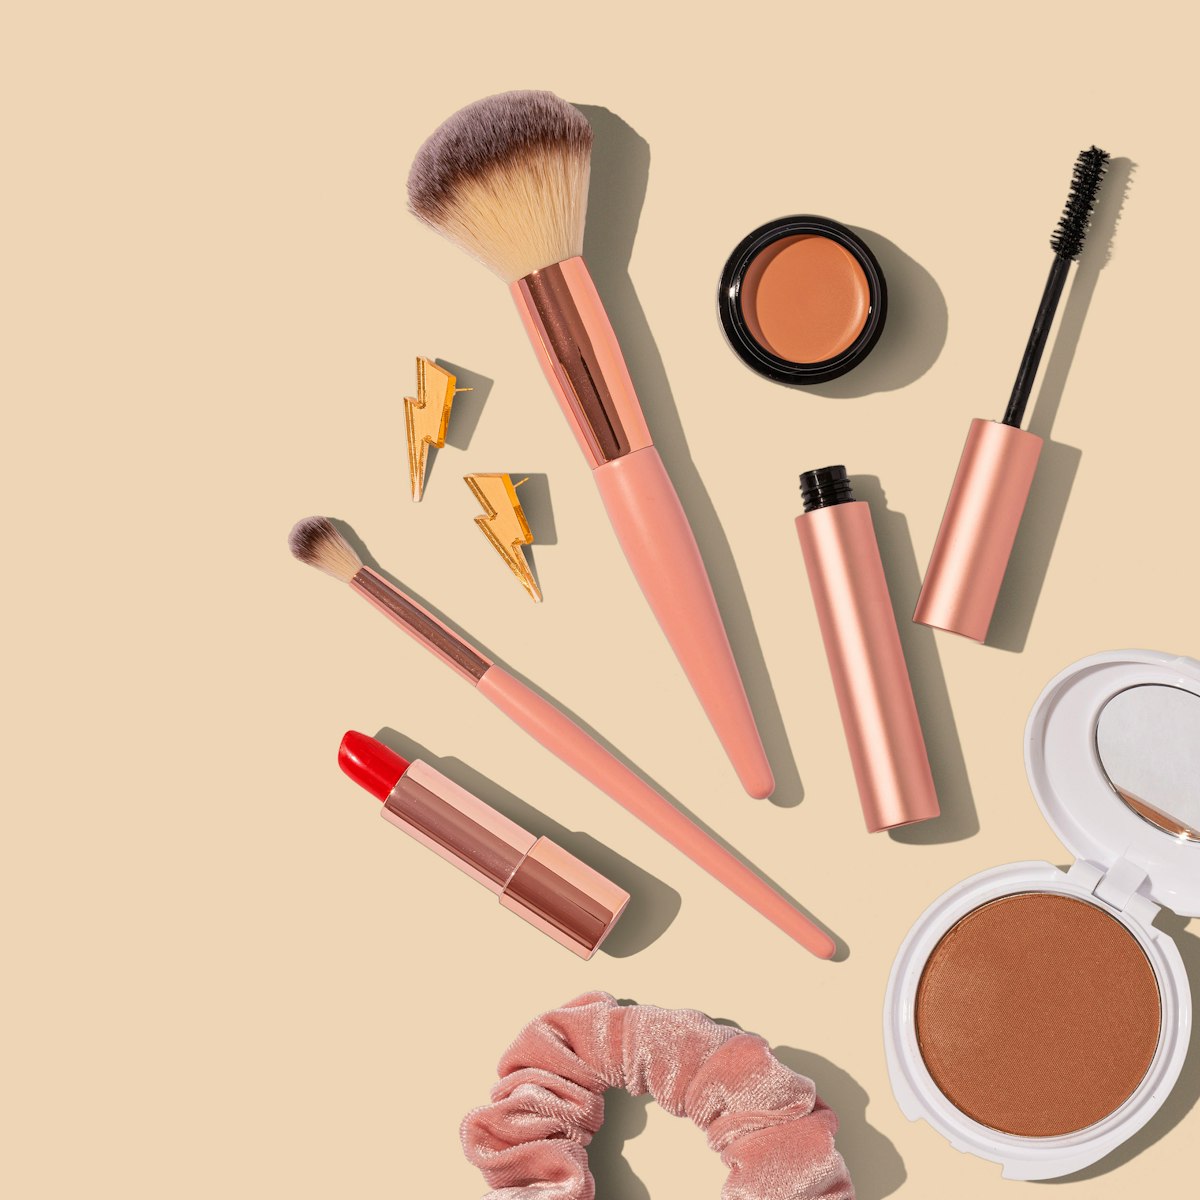 7 Methods for Cleaning Makeup Brushes ...